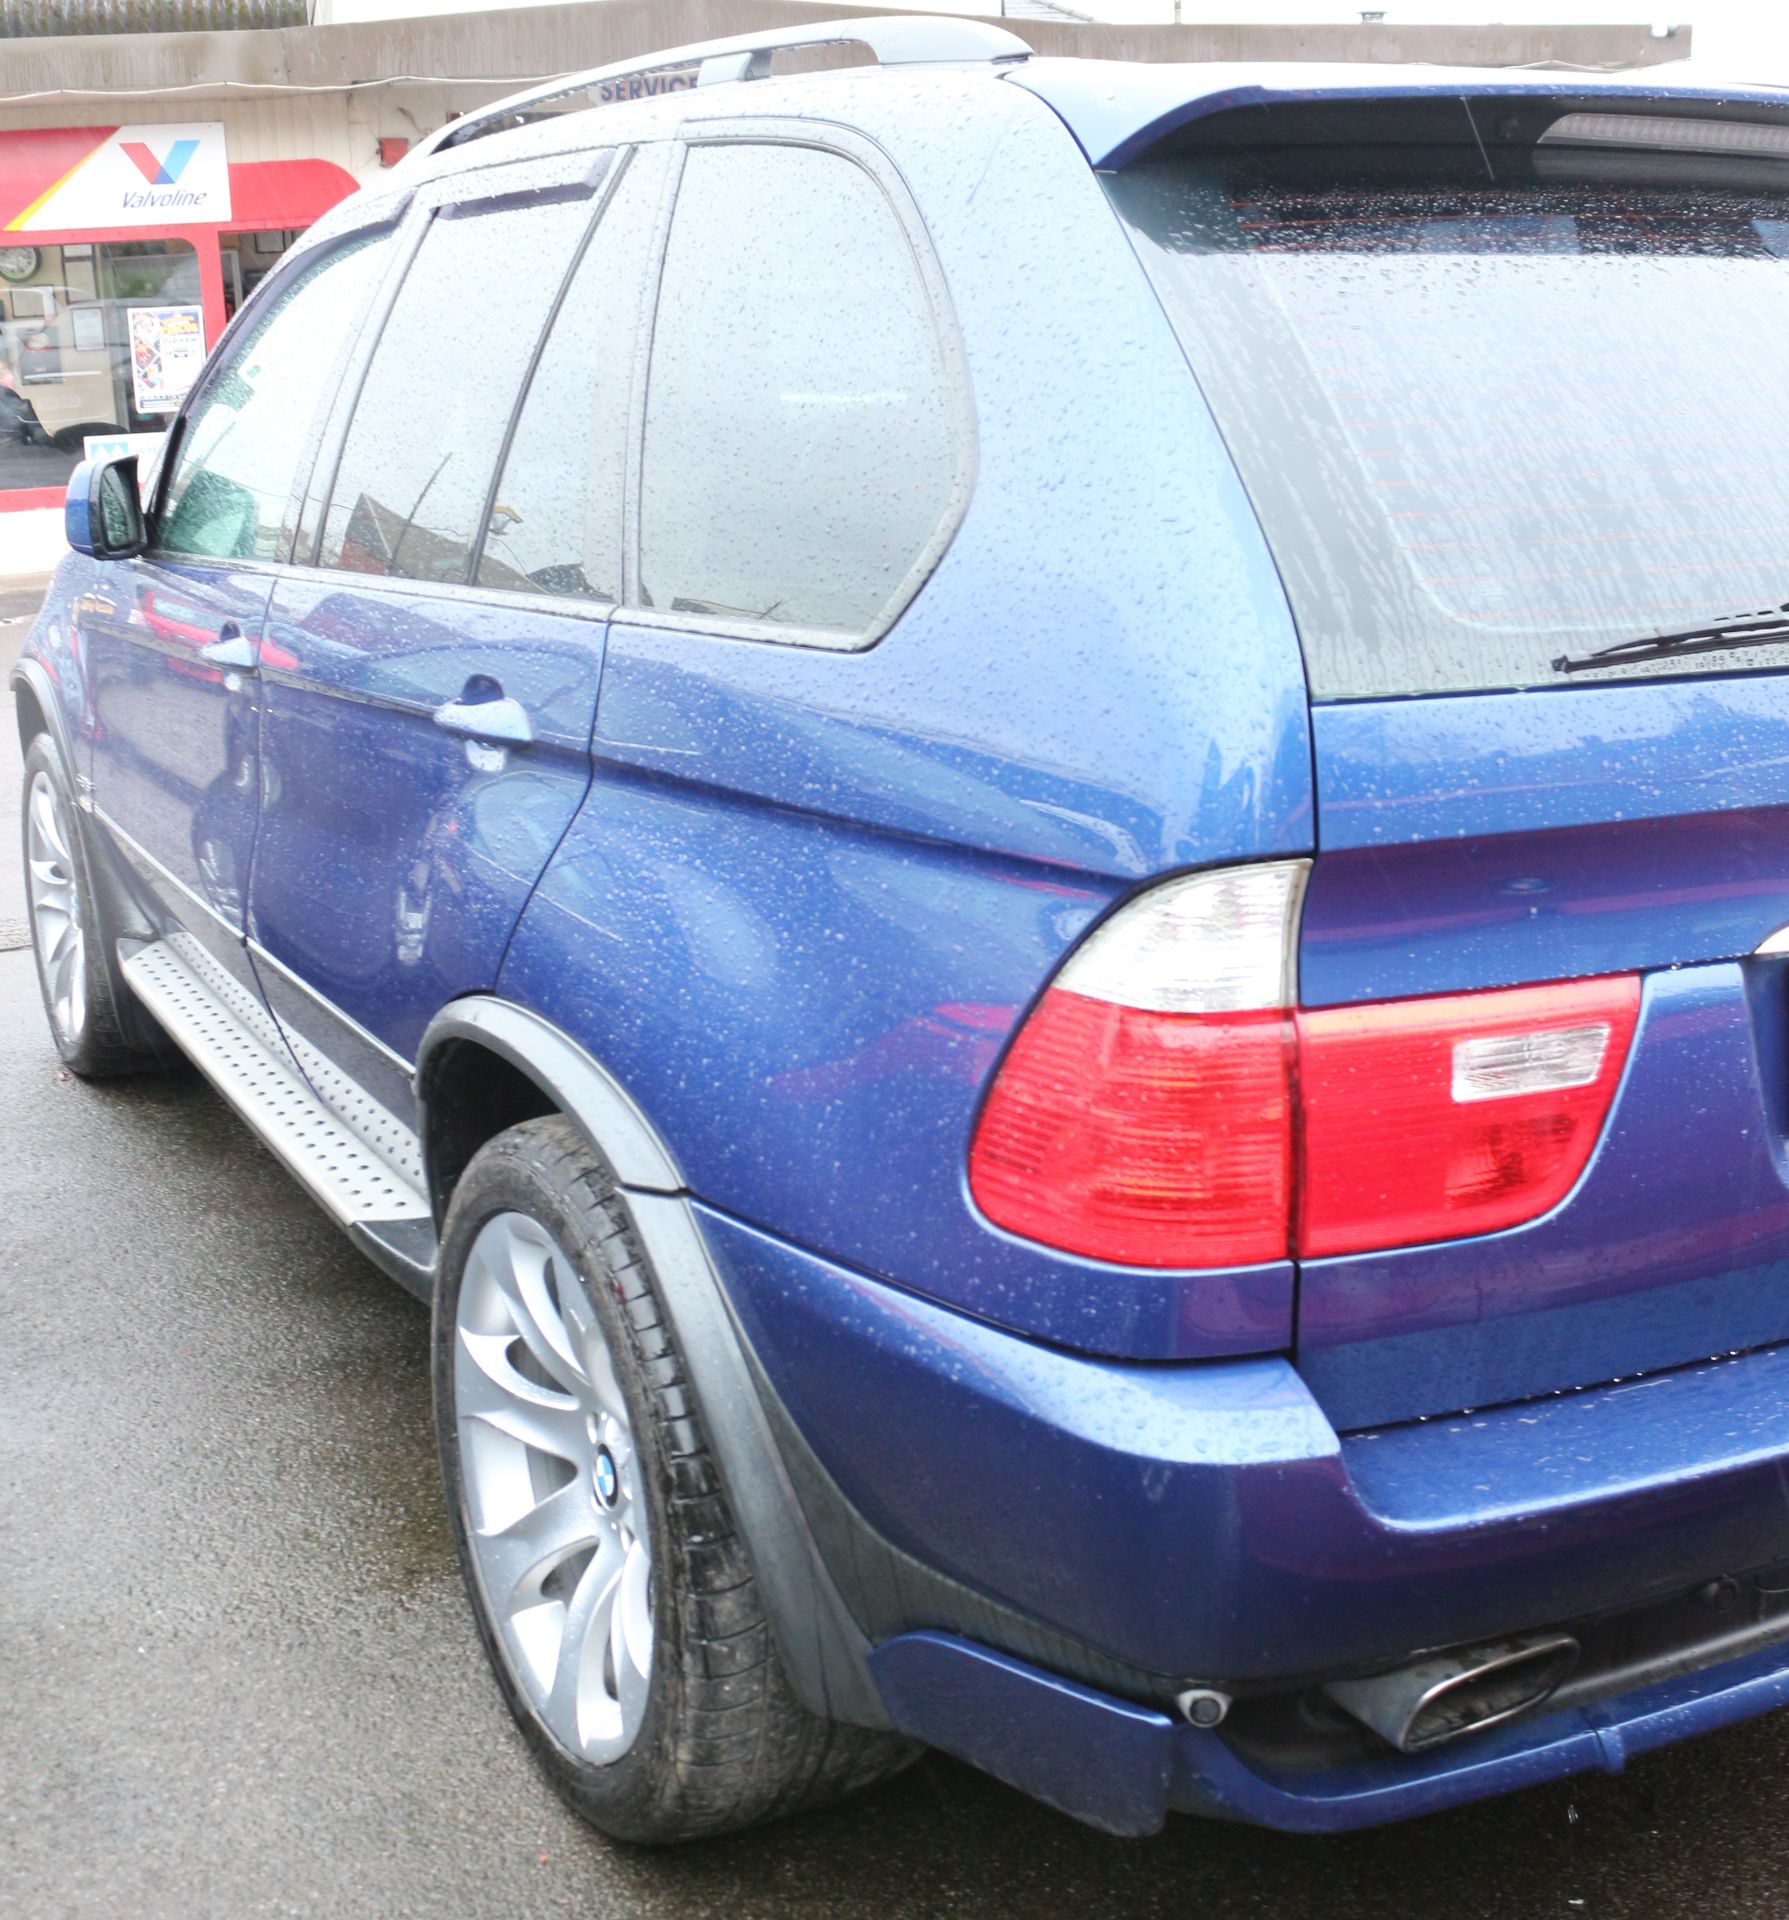 BMW X5, X5 IS FACE LIFT MODEL, HN54 FXZ, 4-8 IS, PETROL, AUTOMATIC, 2004, 5 DOOR, CURRENT RECORDED - Image 5 of 15